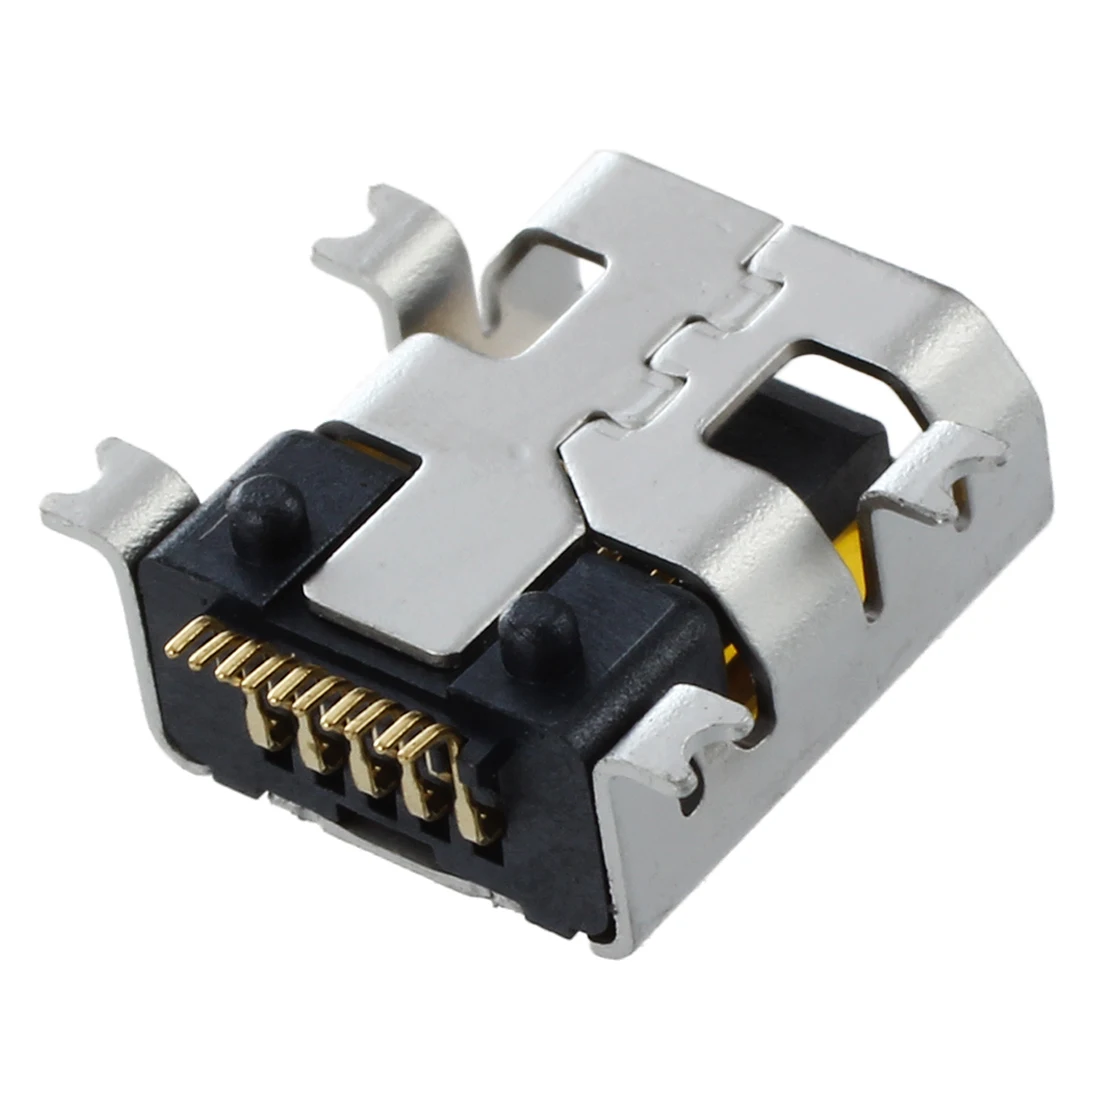 HHTL 10 Pcs Female Mini USB Type B 10 Pin SMT SMD Mount Jack Connector Portin Connectors from